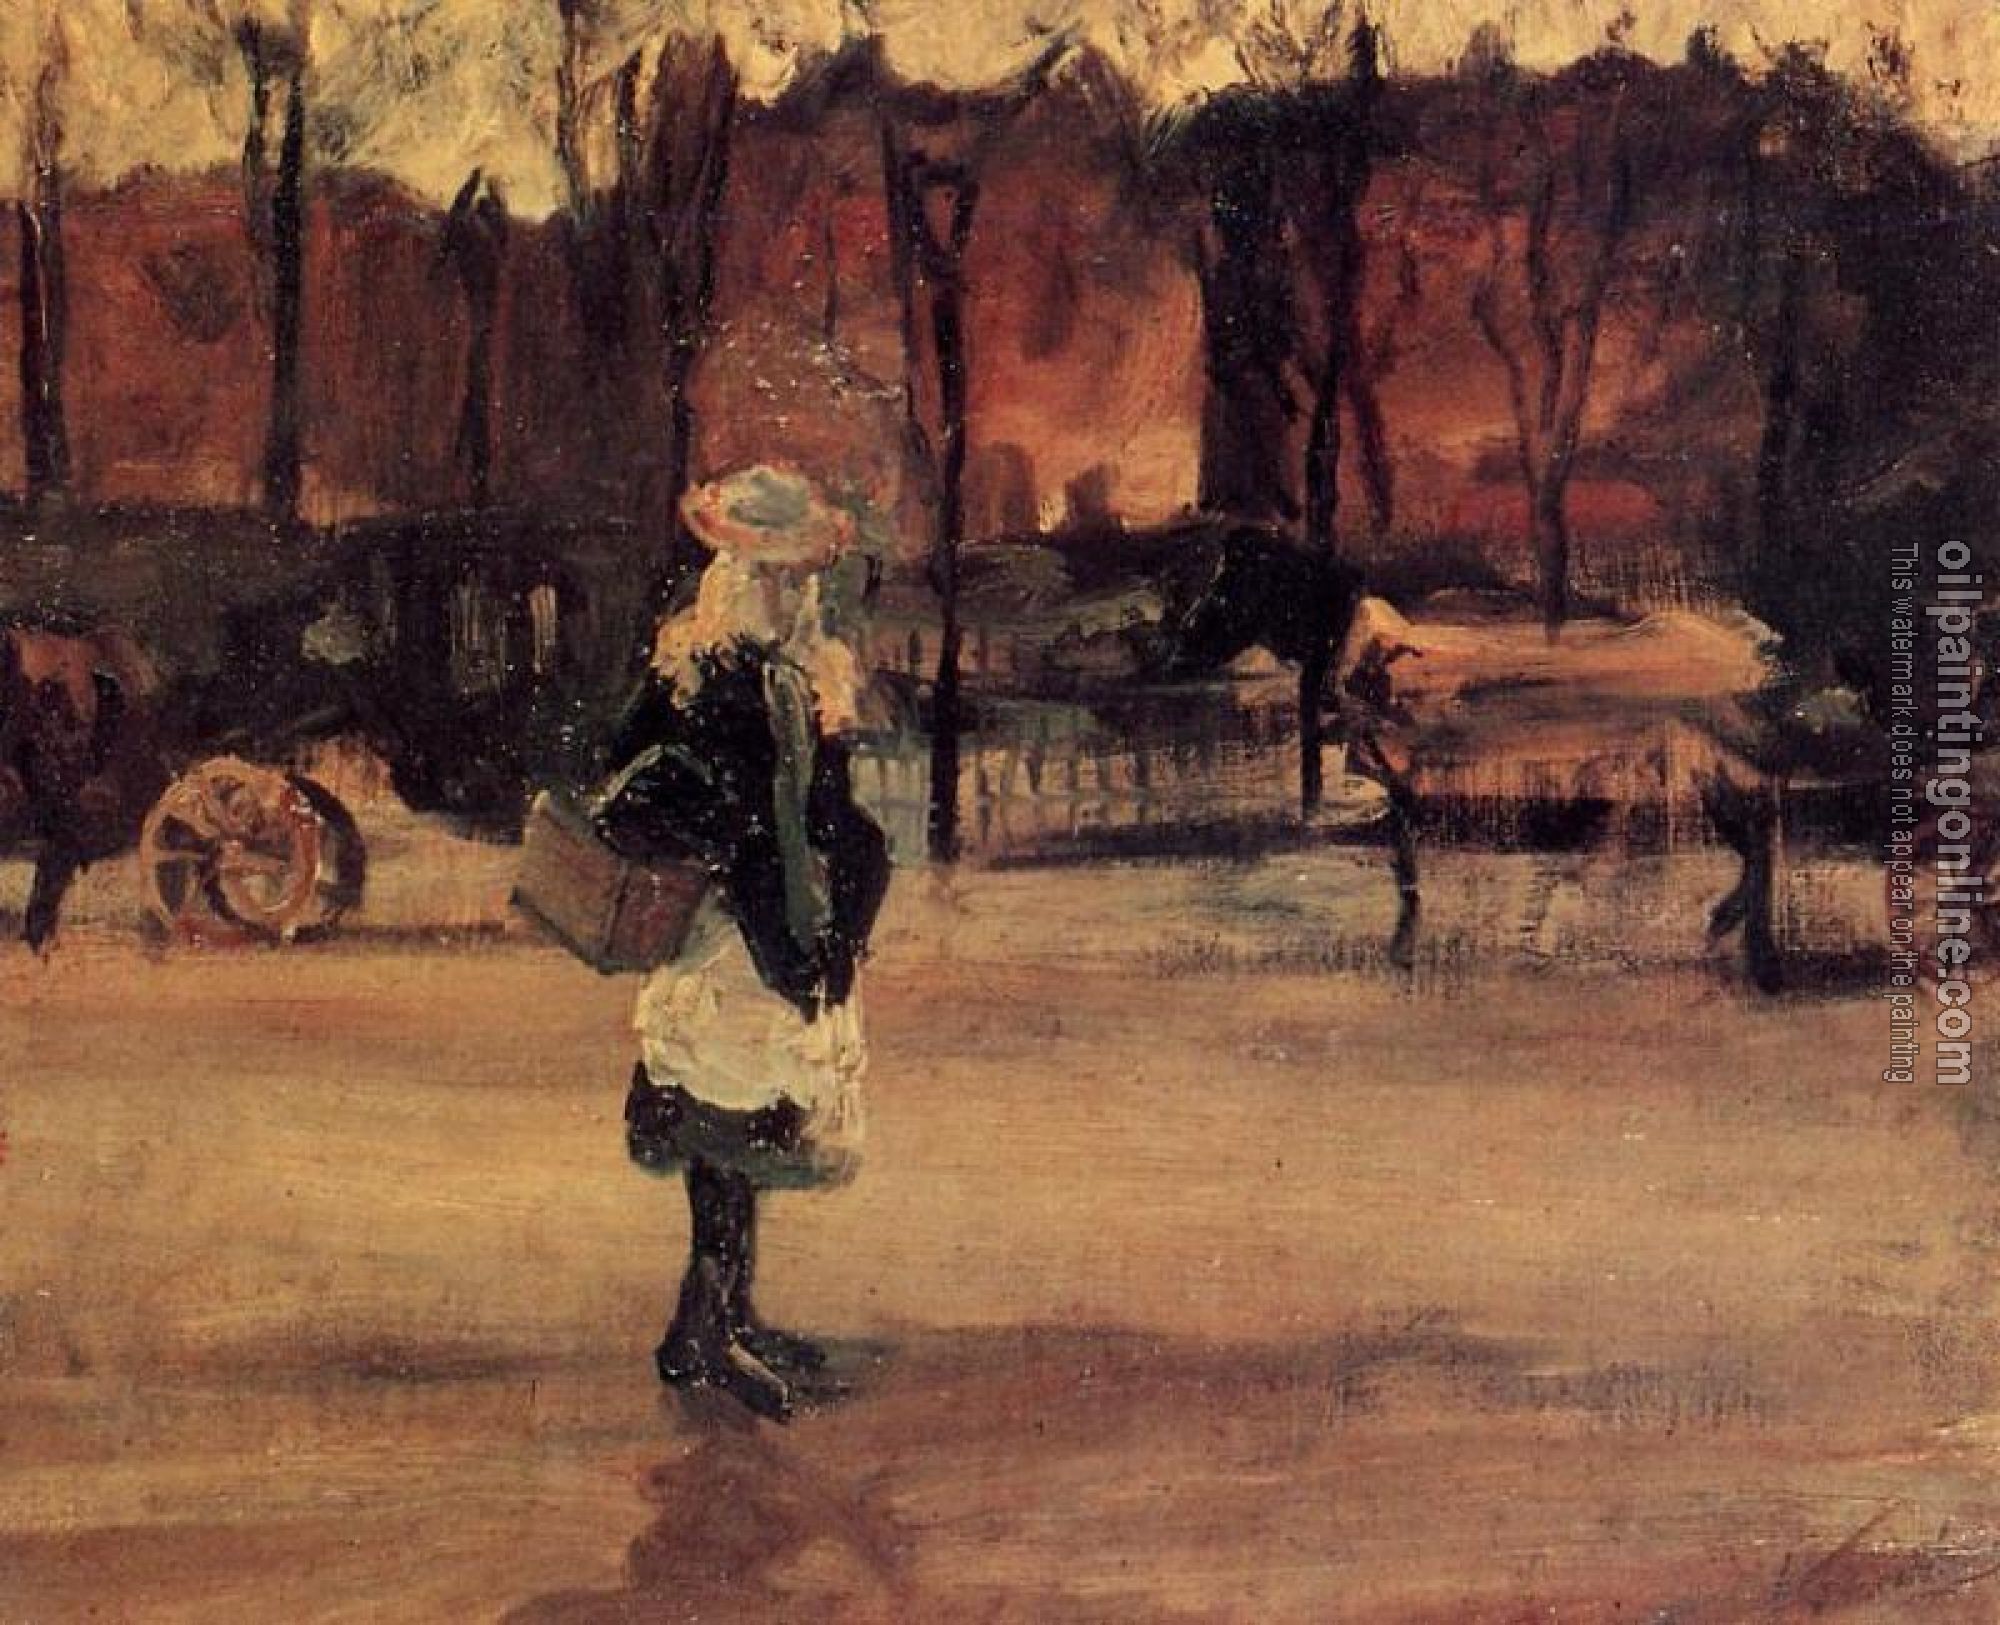 Gogh, Vincent van - A Girl in the Street, Two Coaches in the Background